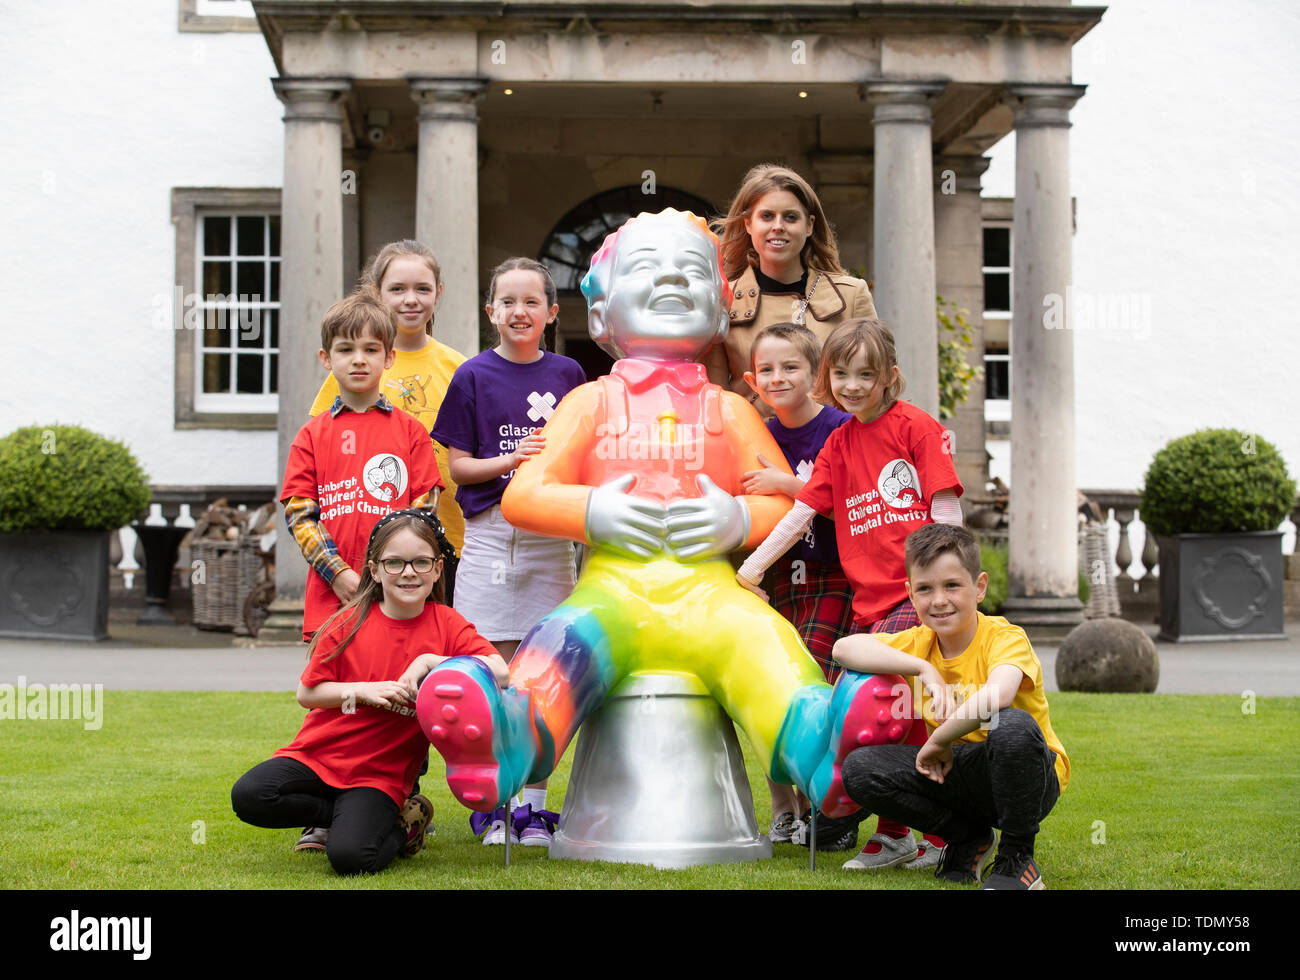 Princess Beatrice, along with children from Scotland's children's hospital charities, attends a photo call for the launch of the Oor Wullie's Big Bucket Trail, outside Prestonfield House Hotel in Edinburgh, one of several life-sized sculptures of the favourite comic book character on a public art trail. Stock Photo